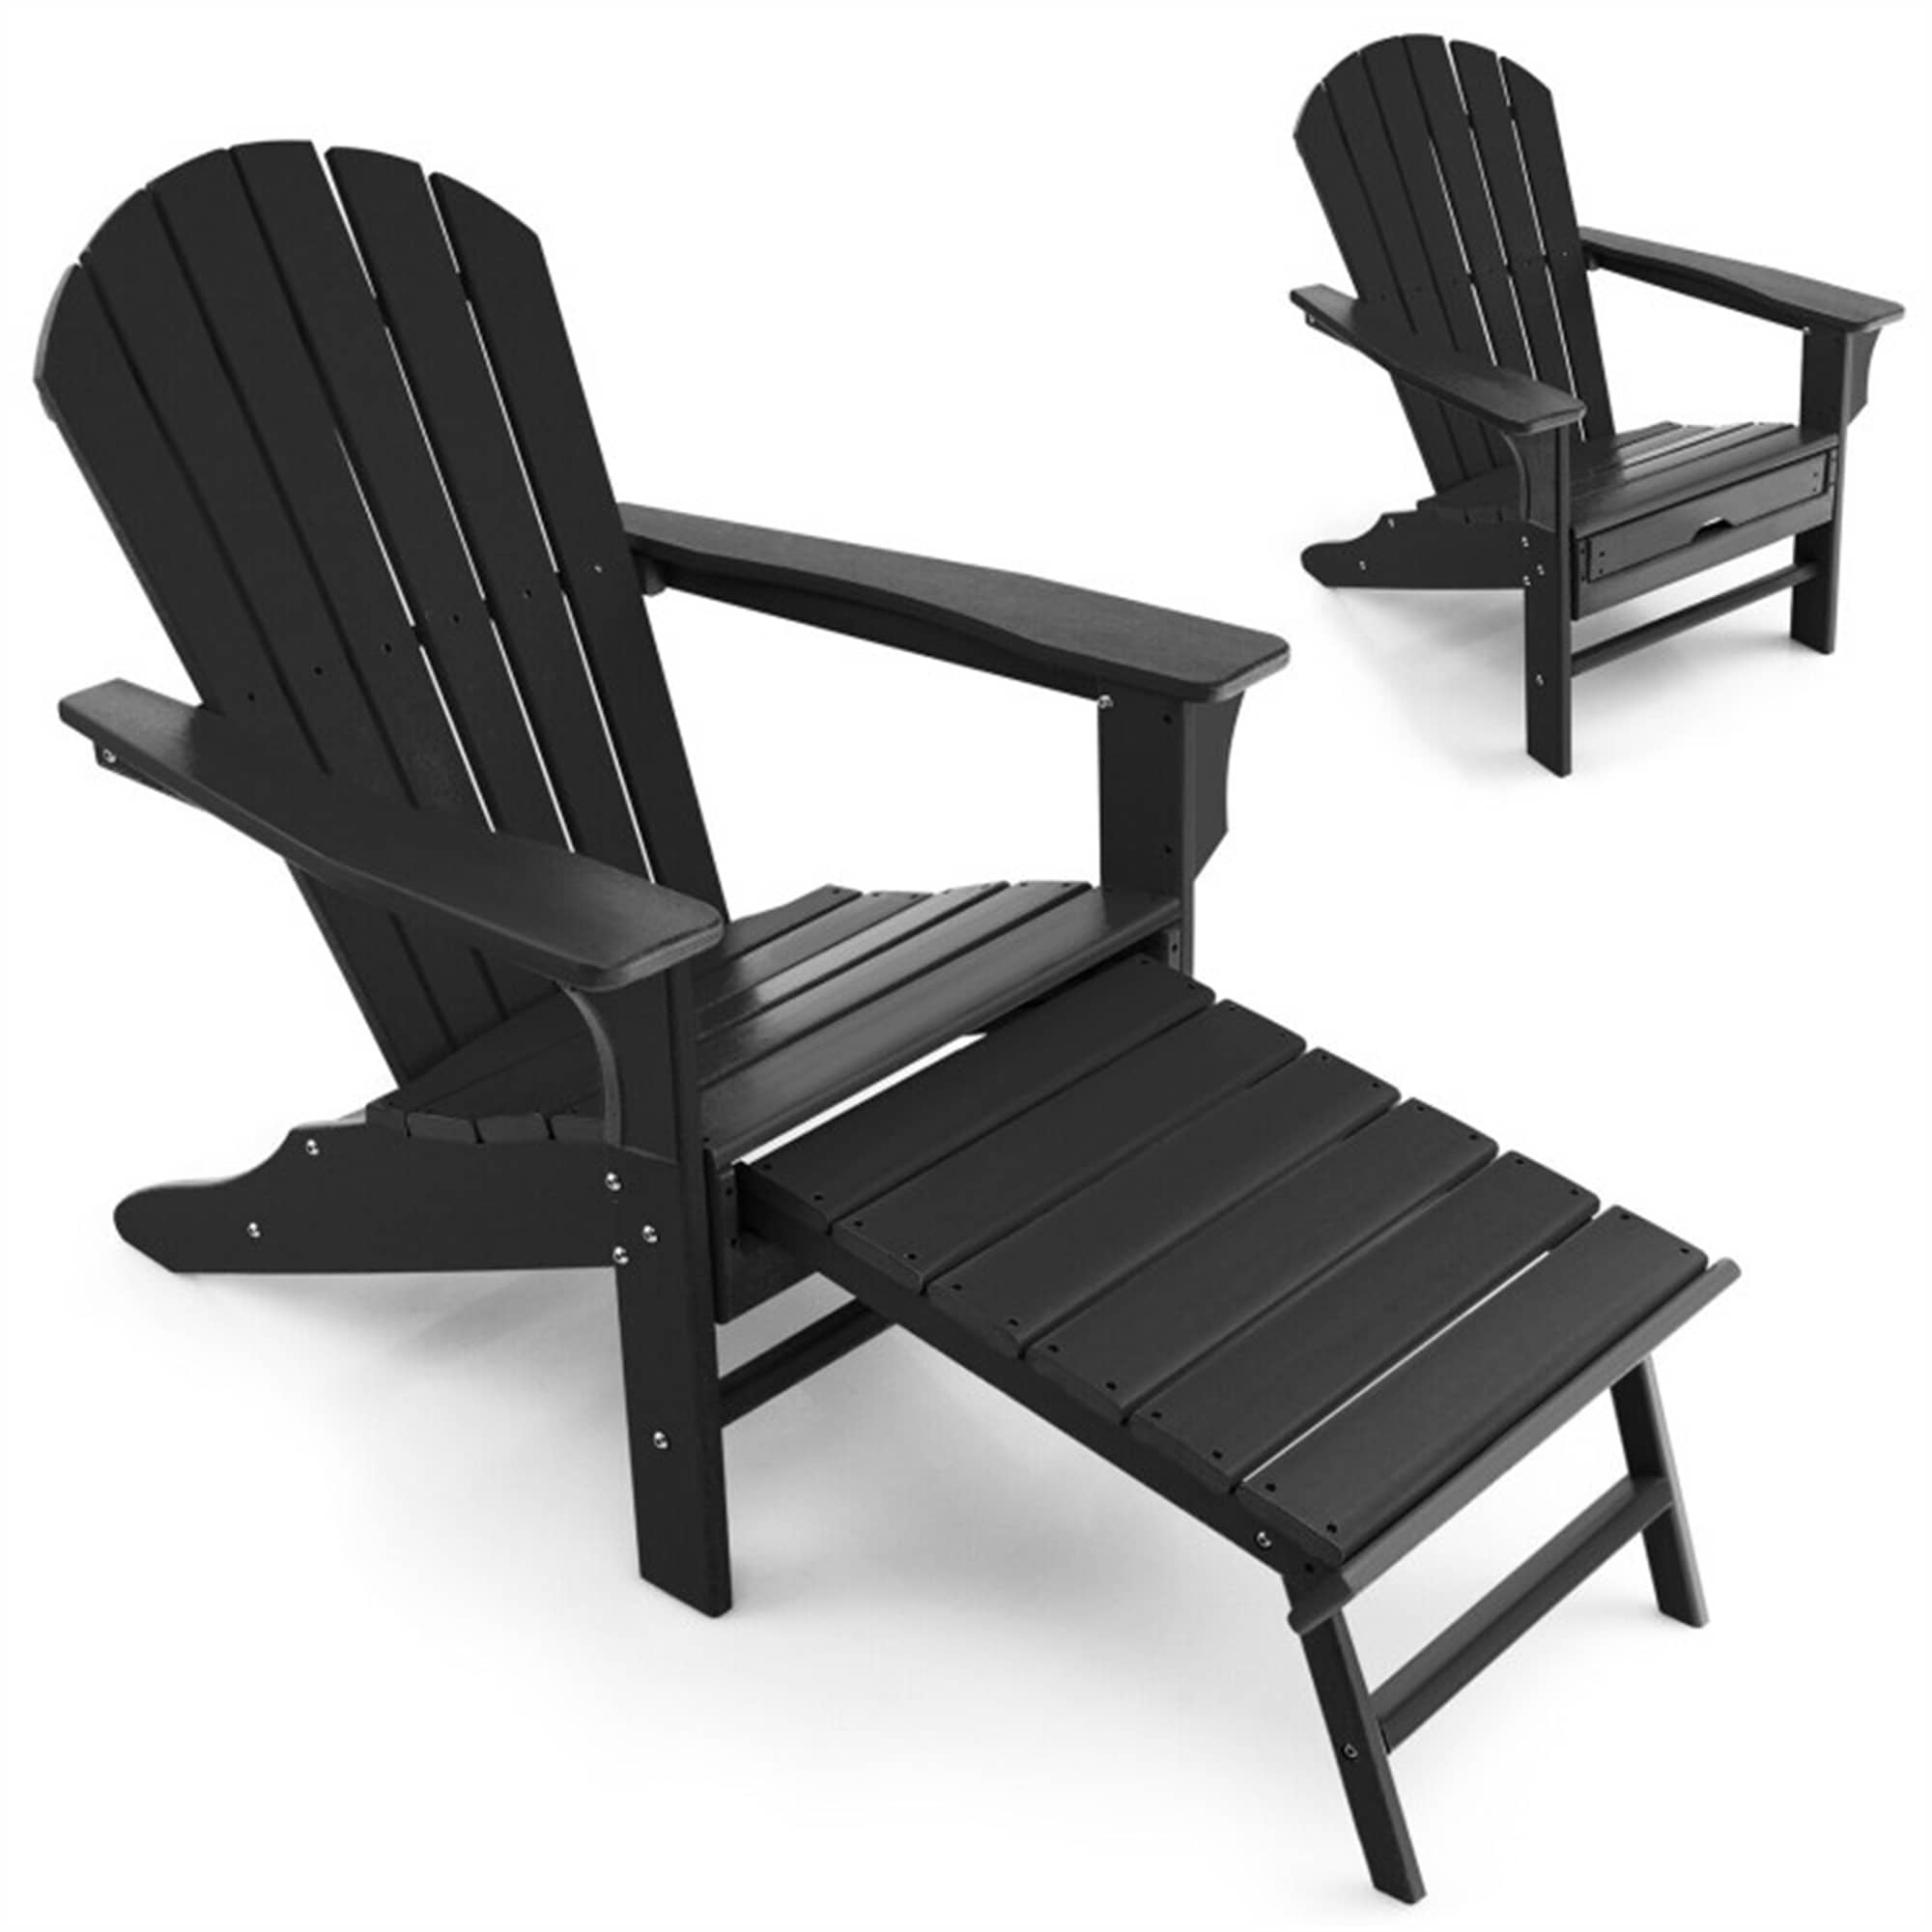 Patio HDPE Adirondack Chair with Retractable Ottoman